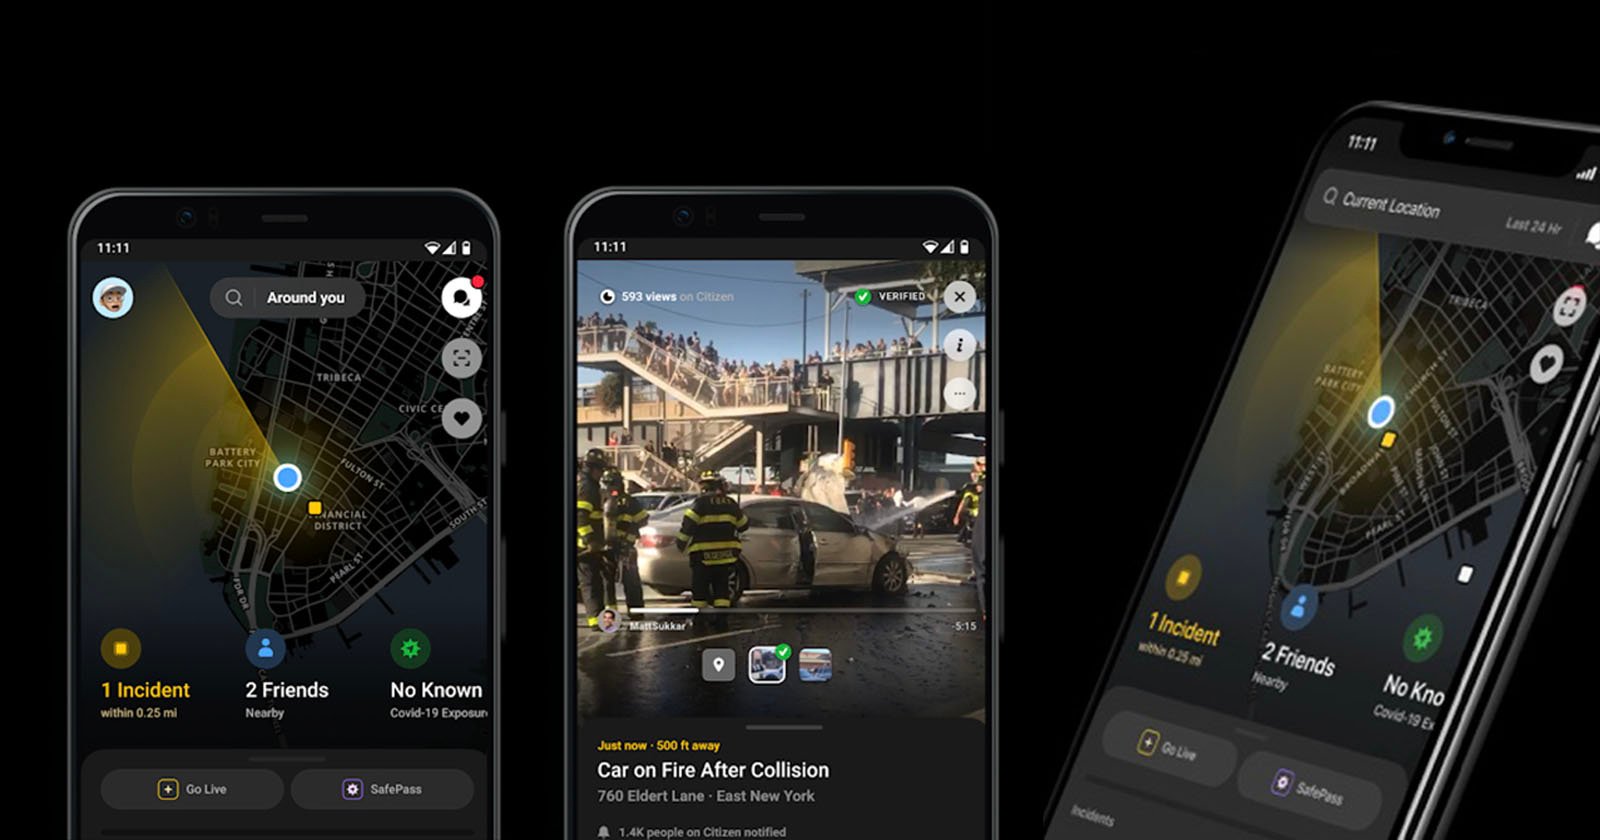 Citizen App Pays $25/Hr for People to Film and Livestream Crime Scenes |  PetaPixel